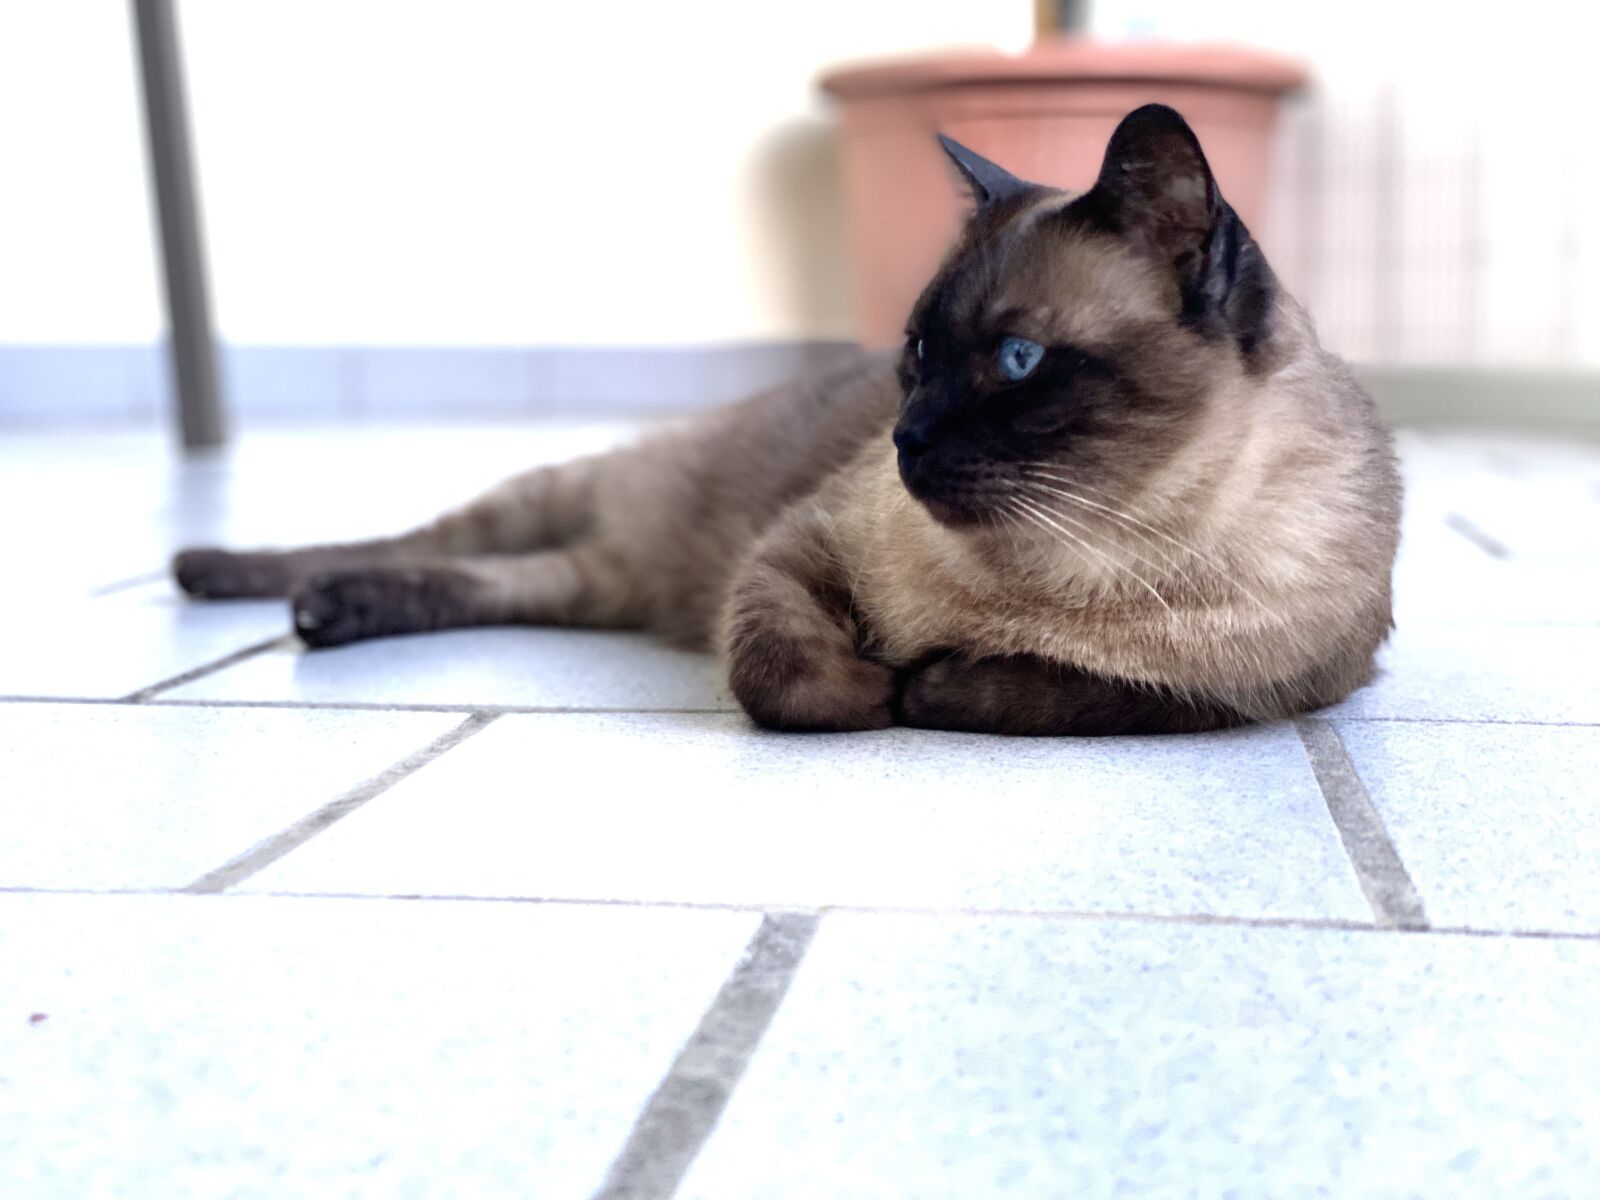 Apple iPhone 11 Pro Max + iPhone 11 Pro Max back dual camera 6mm f/2 sample photo. Cat, siamese cat, siamese photography